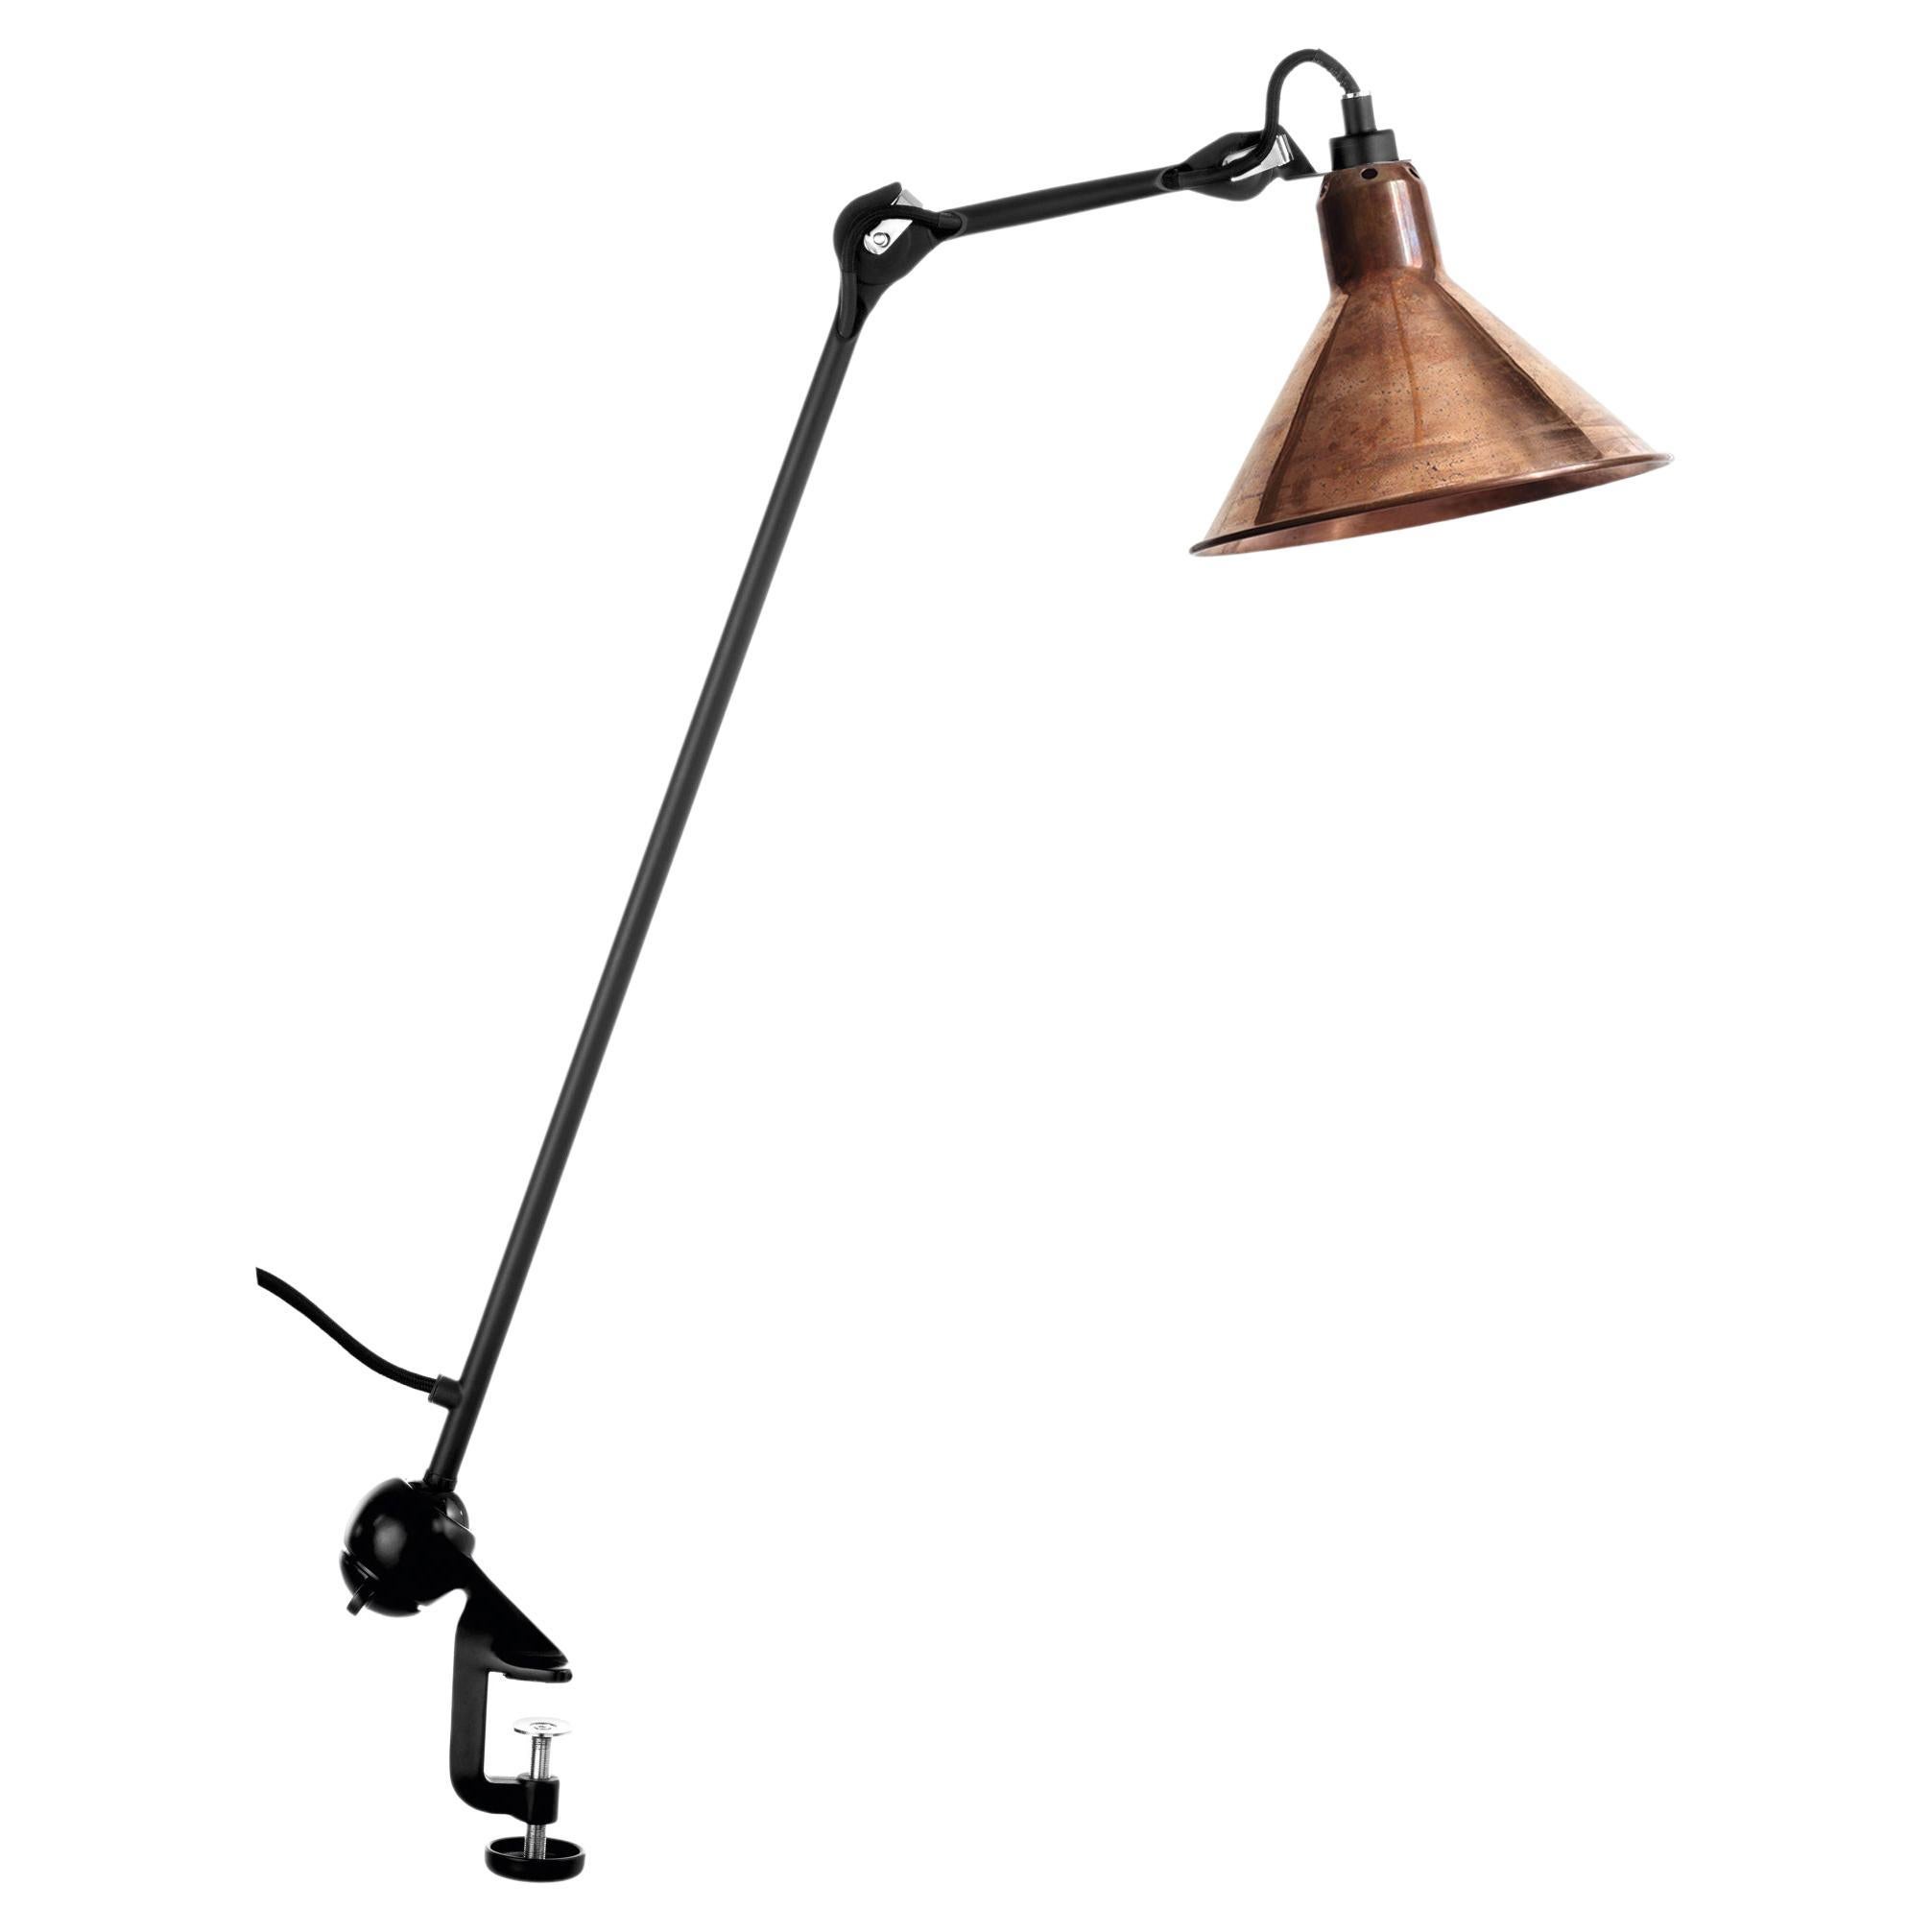 DCW Editions La Lampe Gras N°201 Conic Table Lamp in Black and Raw Copper Shade For Sale